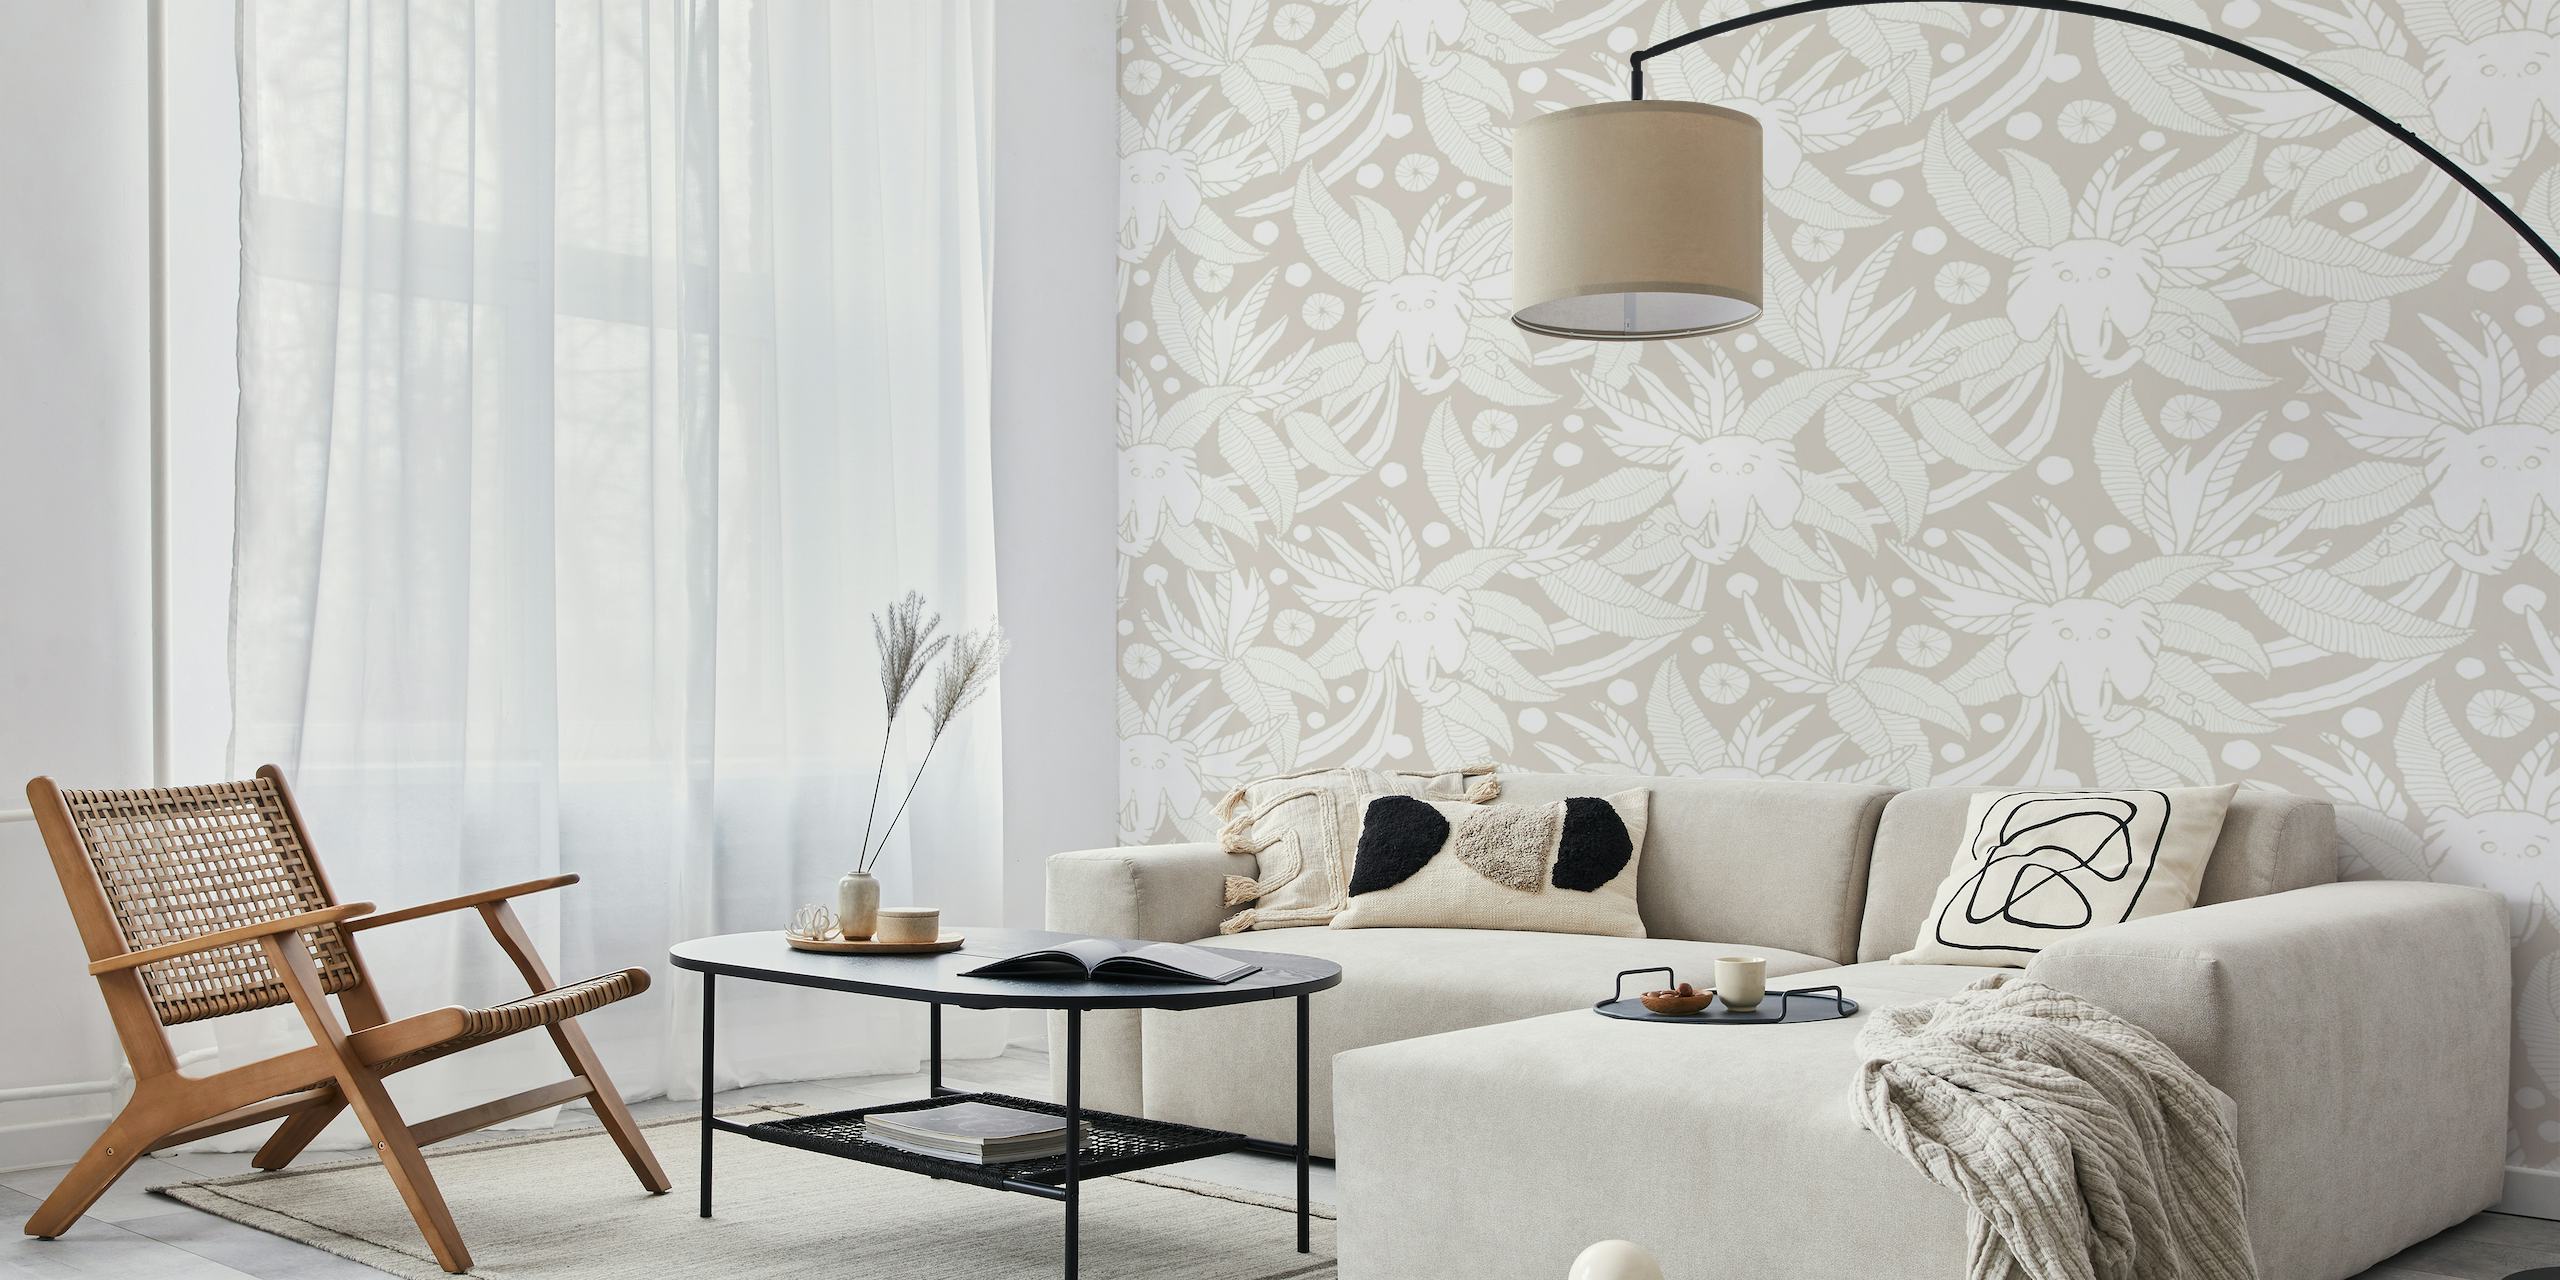 Elephant Greige patterned wall mural with stylized elephant silhouettes in grey-beige tones